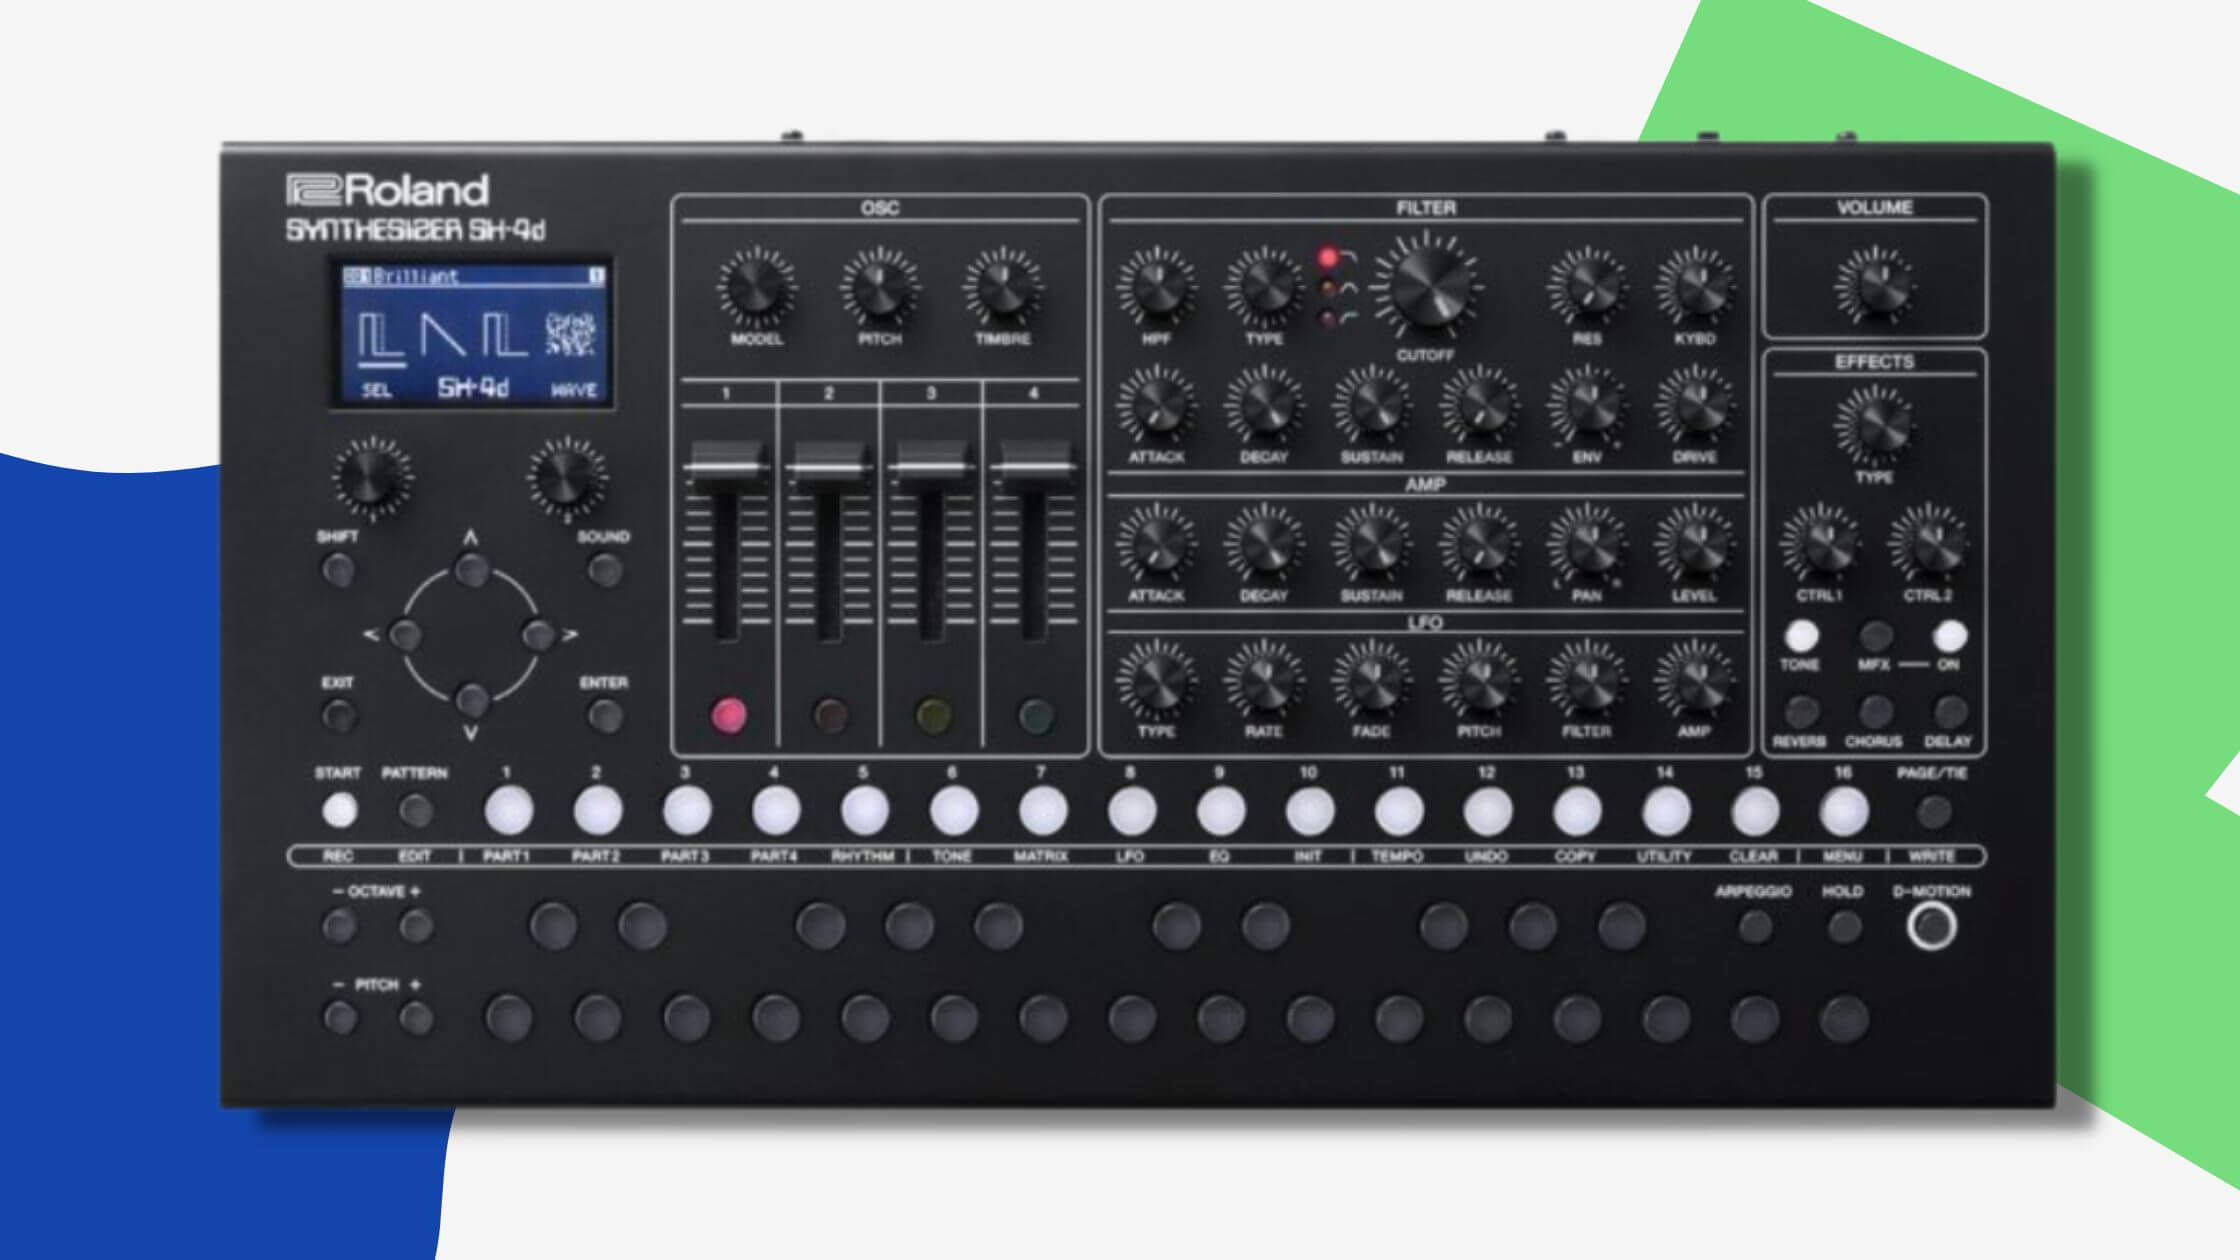 Roland SH-4d: explore new sound possibilities with this desktop synthesizer